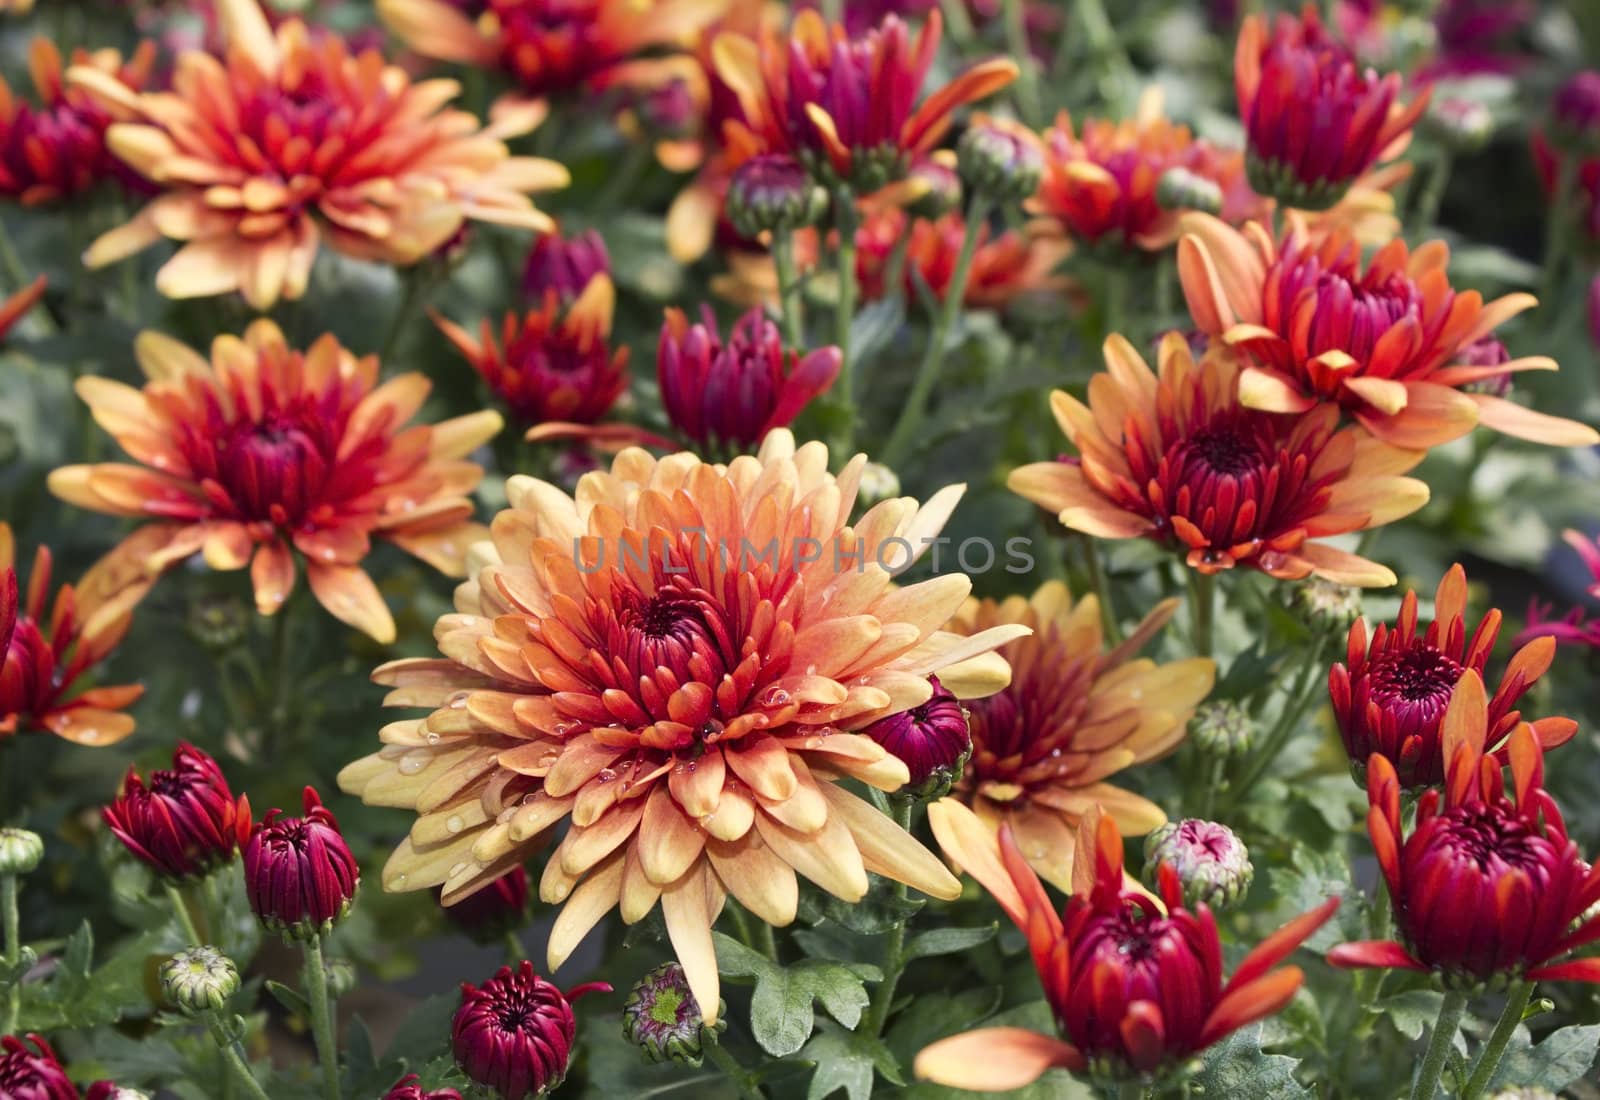 Bright colored chrysanthemum flowers as floral background